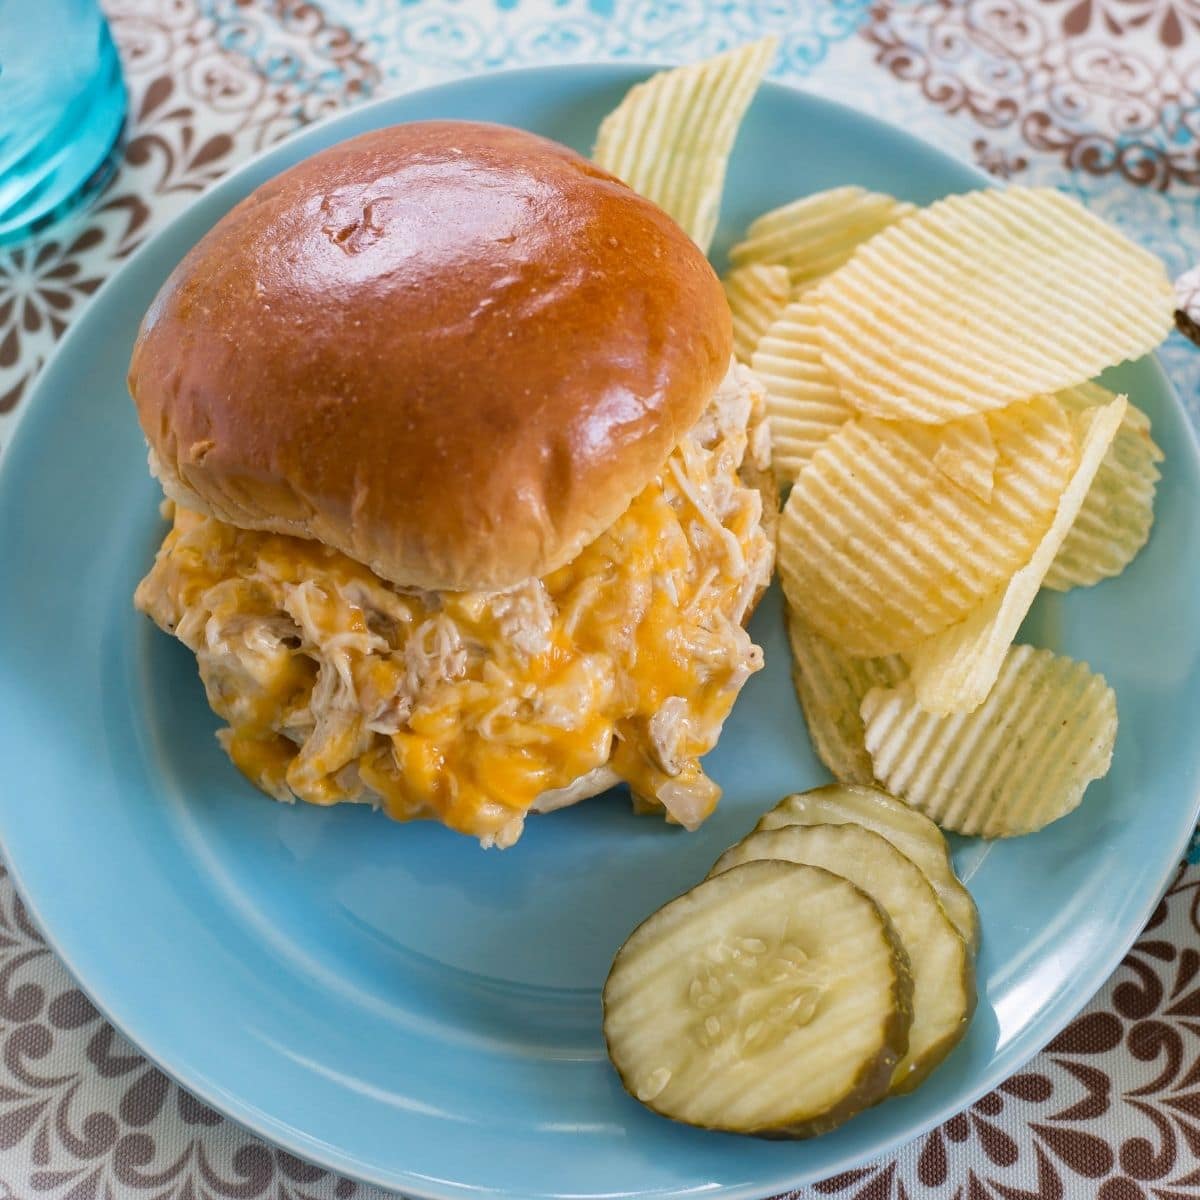 Cheesy chicken sandwich with chips and pickles.